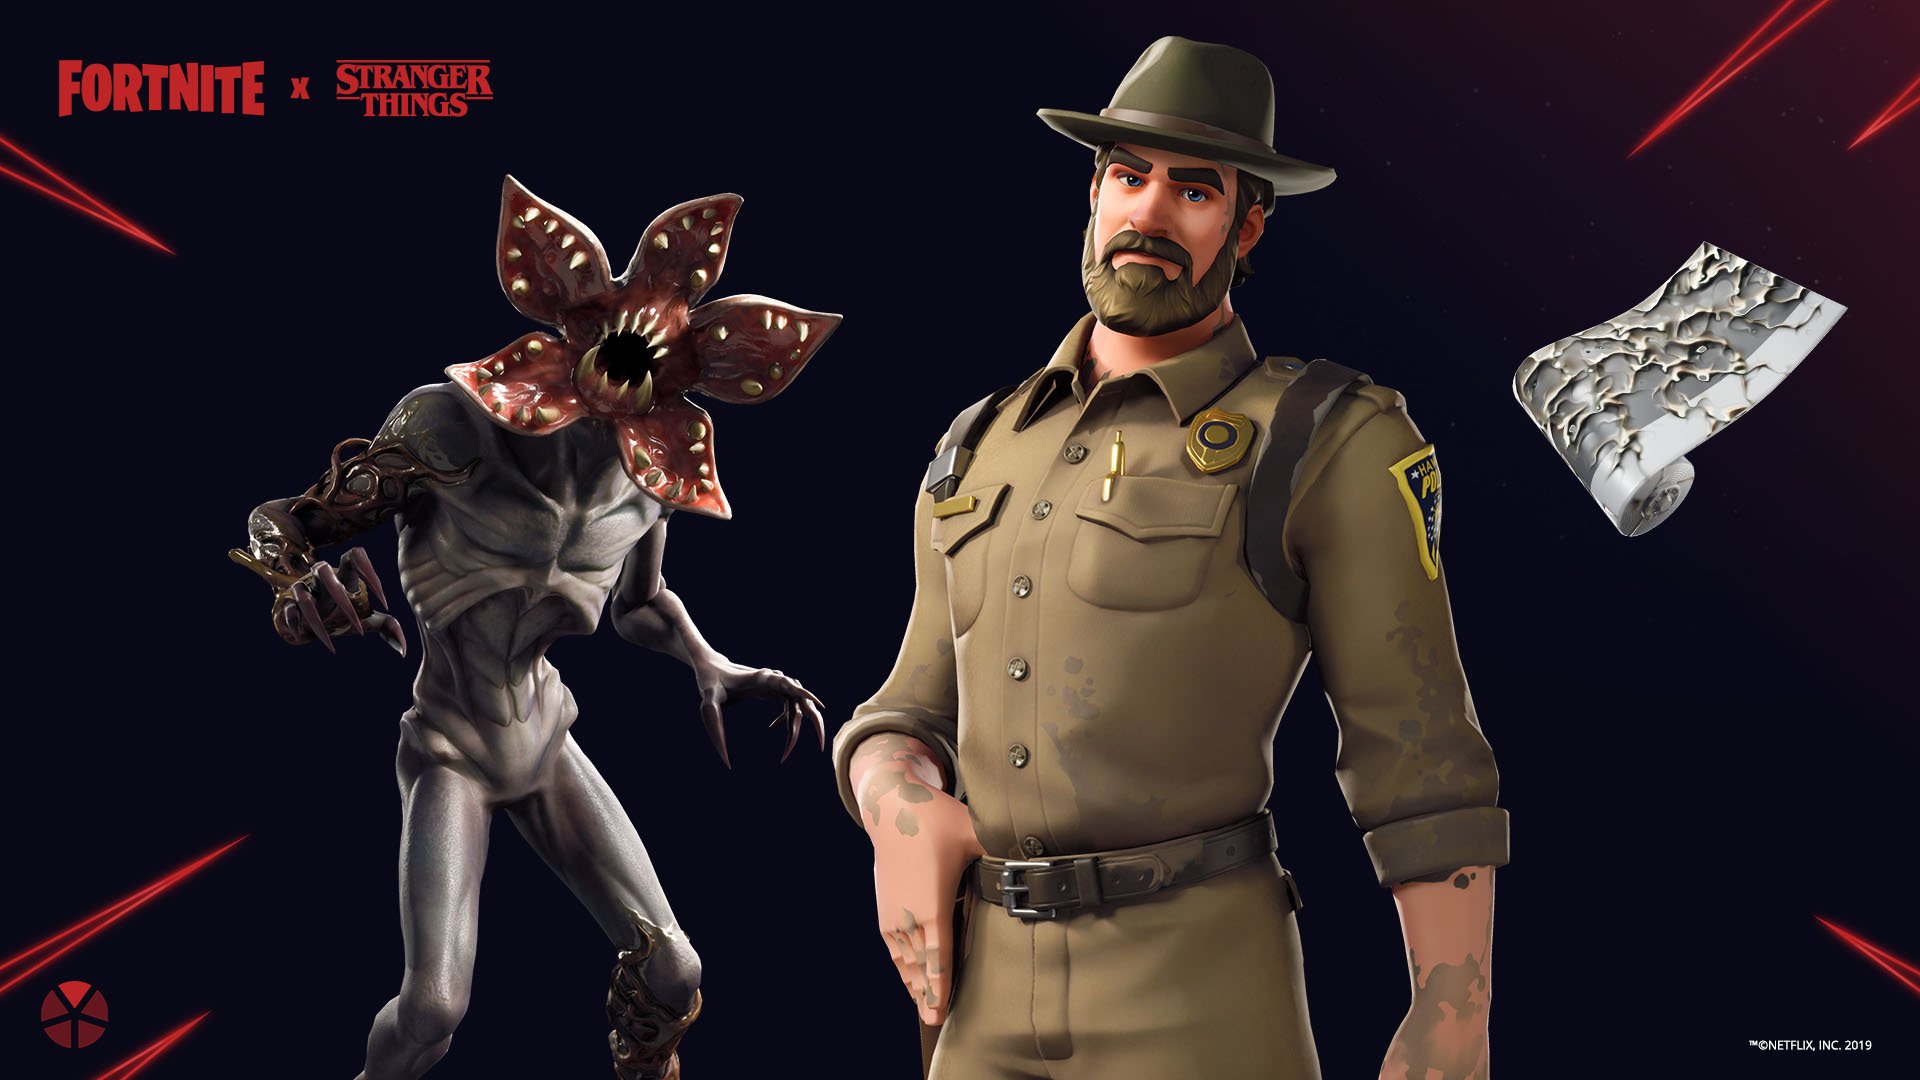 Fortnite brings back Chief Hopper and Demogorgon Outfits for 1920x1080